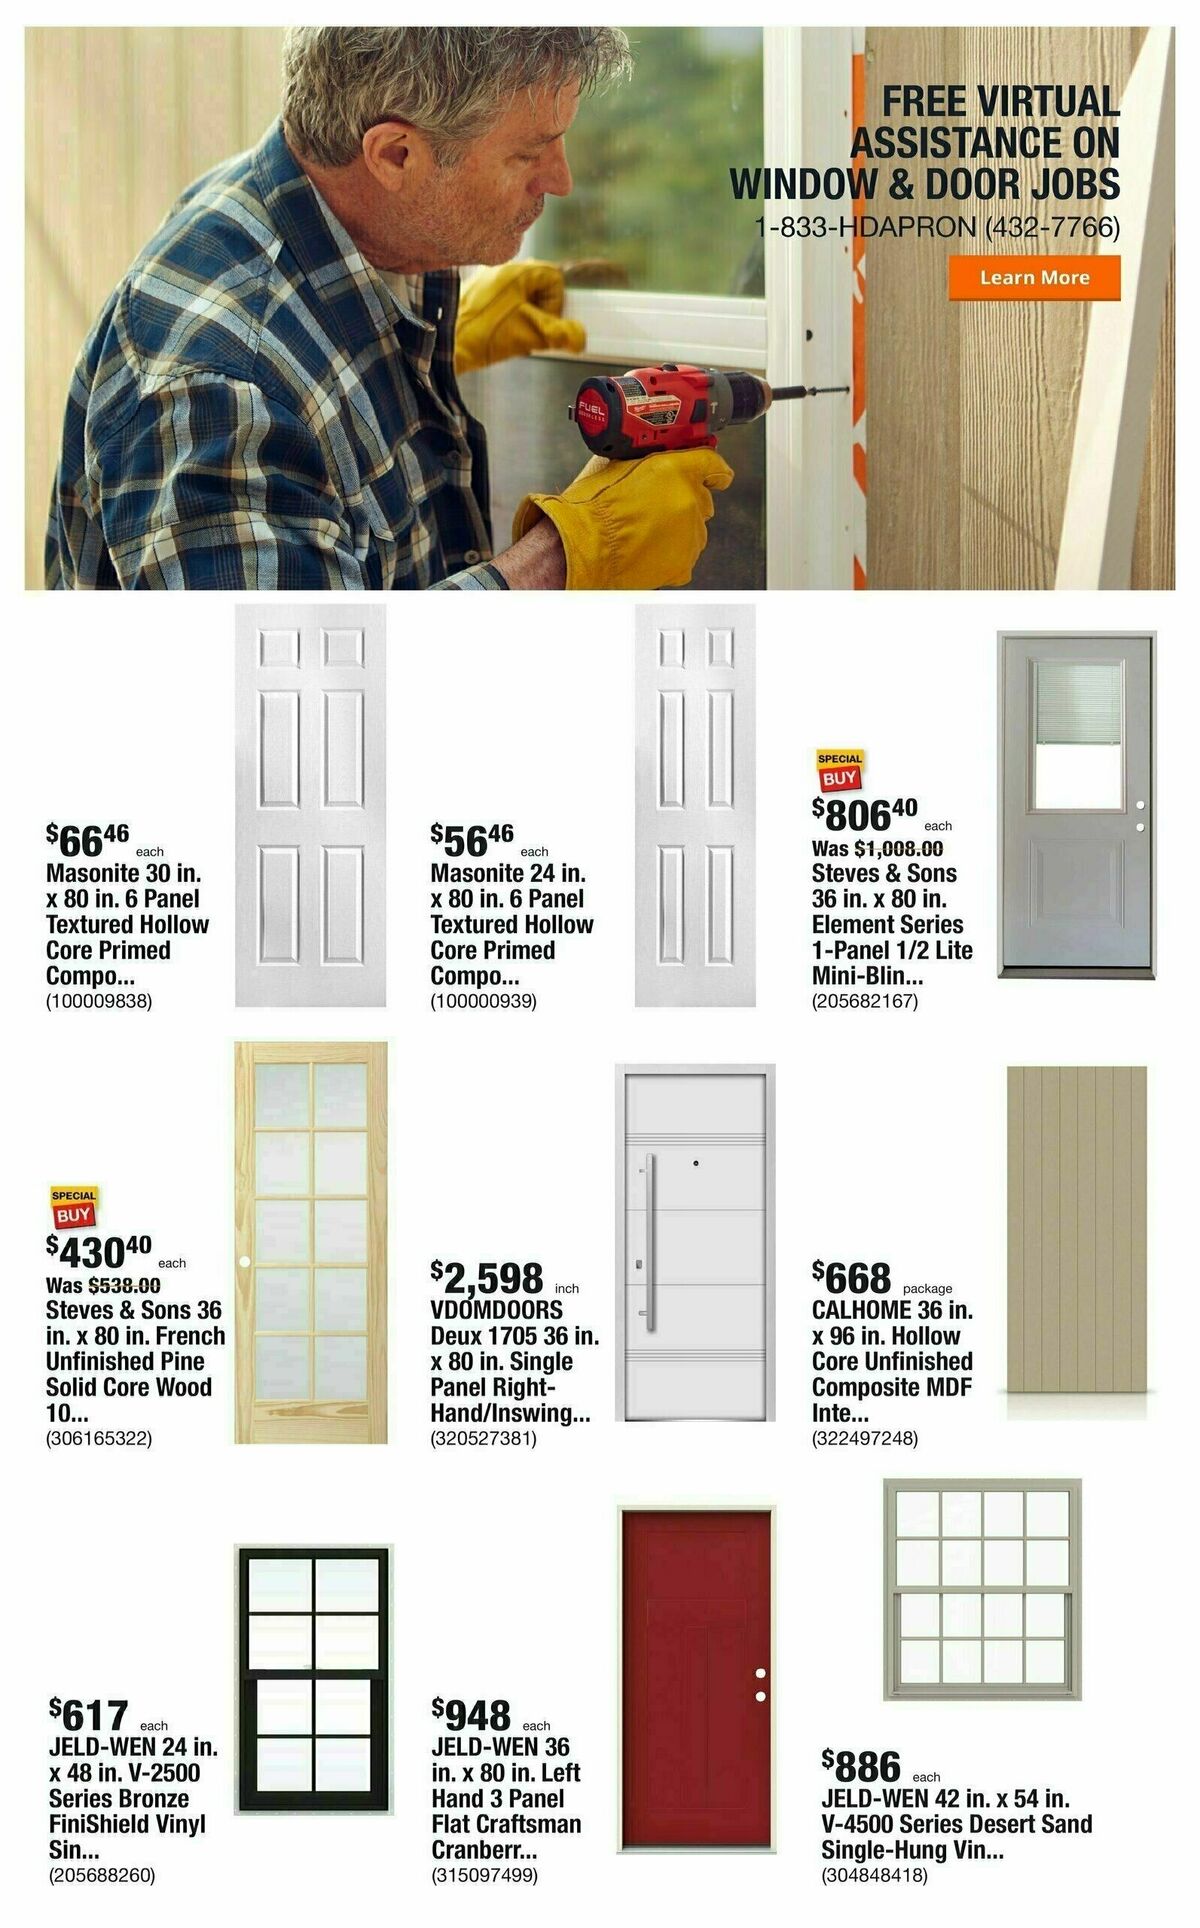 The Home Depot PRO Weekly Ad from February 19